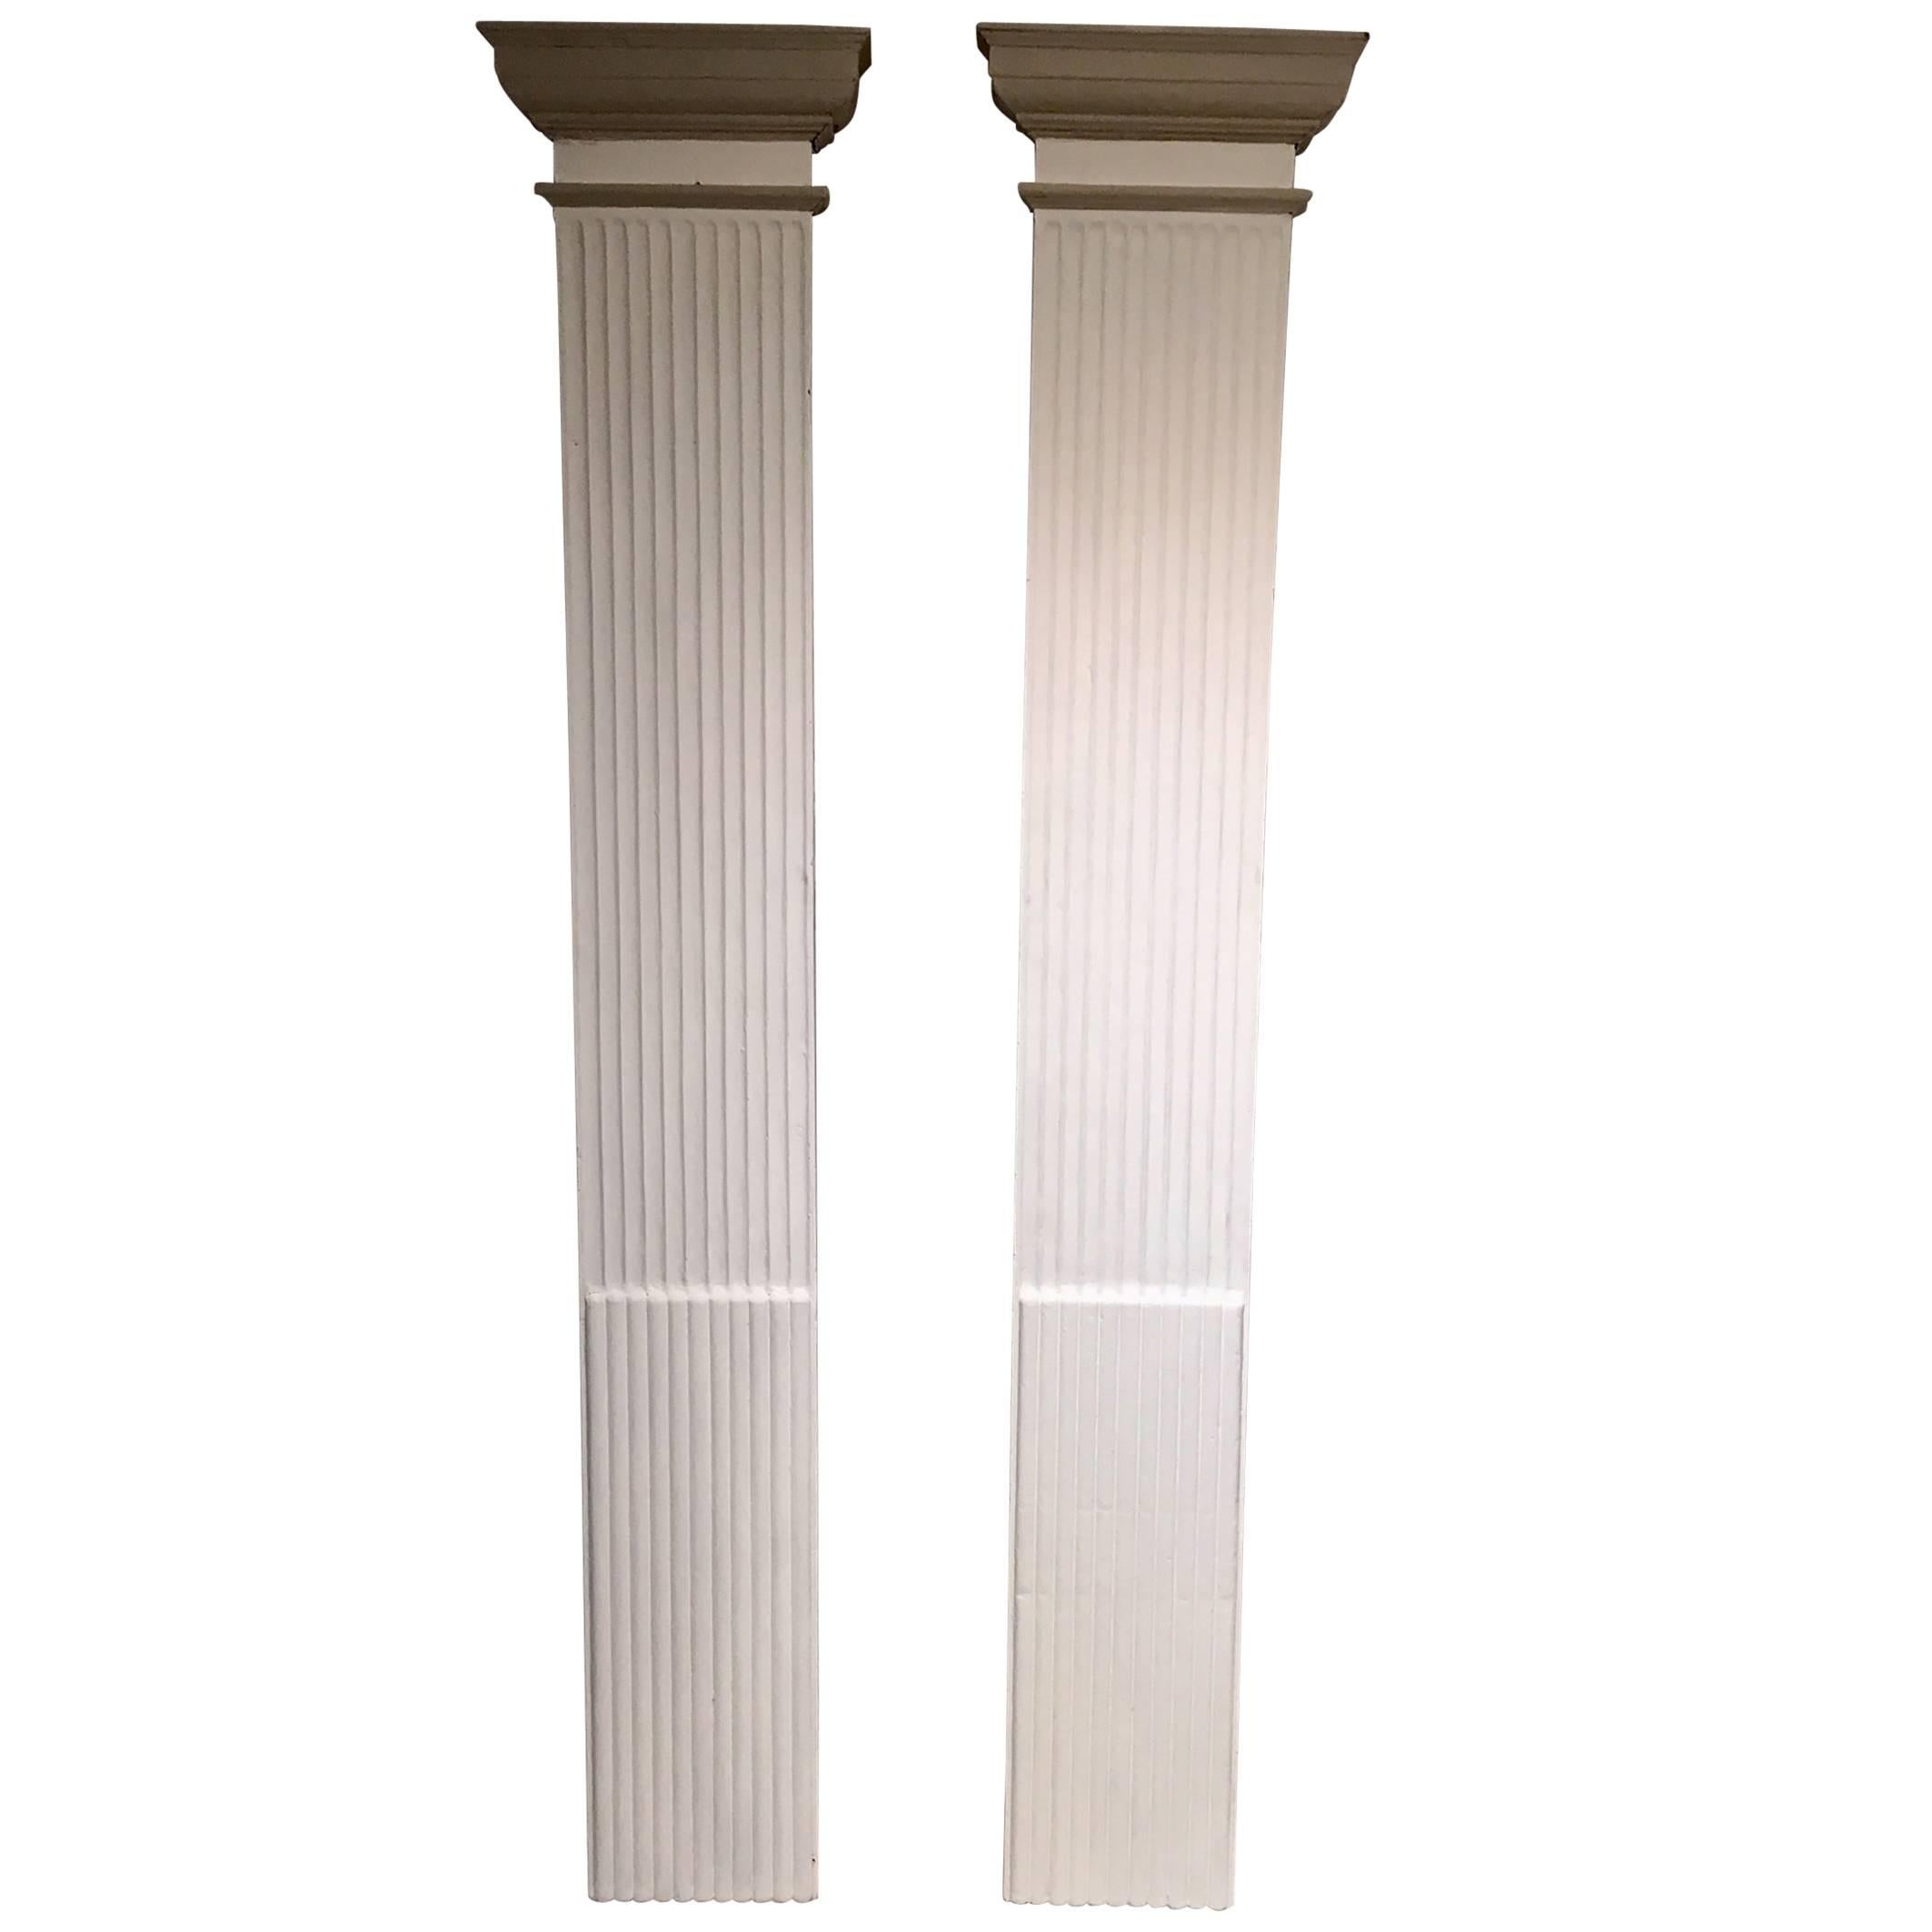 Pair of 19th Century Decorative Painted Wooden Columns For Sale